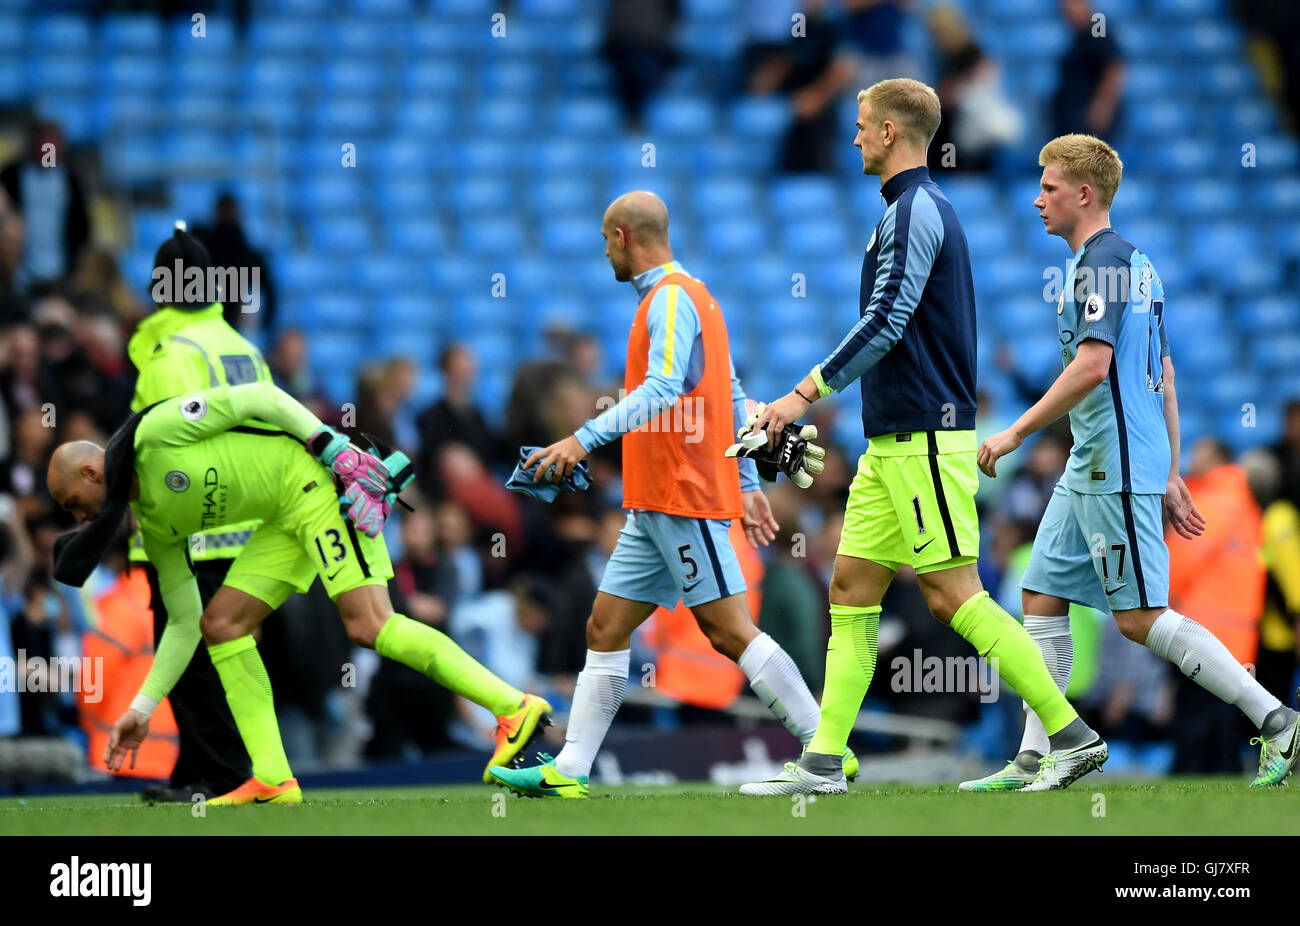 Manchester City goalkeeper Willy Caballero (left), Pablo Zabaleta (second left), goalkeeper Joe Hart (second right) and Kevin De Bruyne after the final whistle during the Premier League match at the Etihad Stadiium, Manchester. Stock Photo